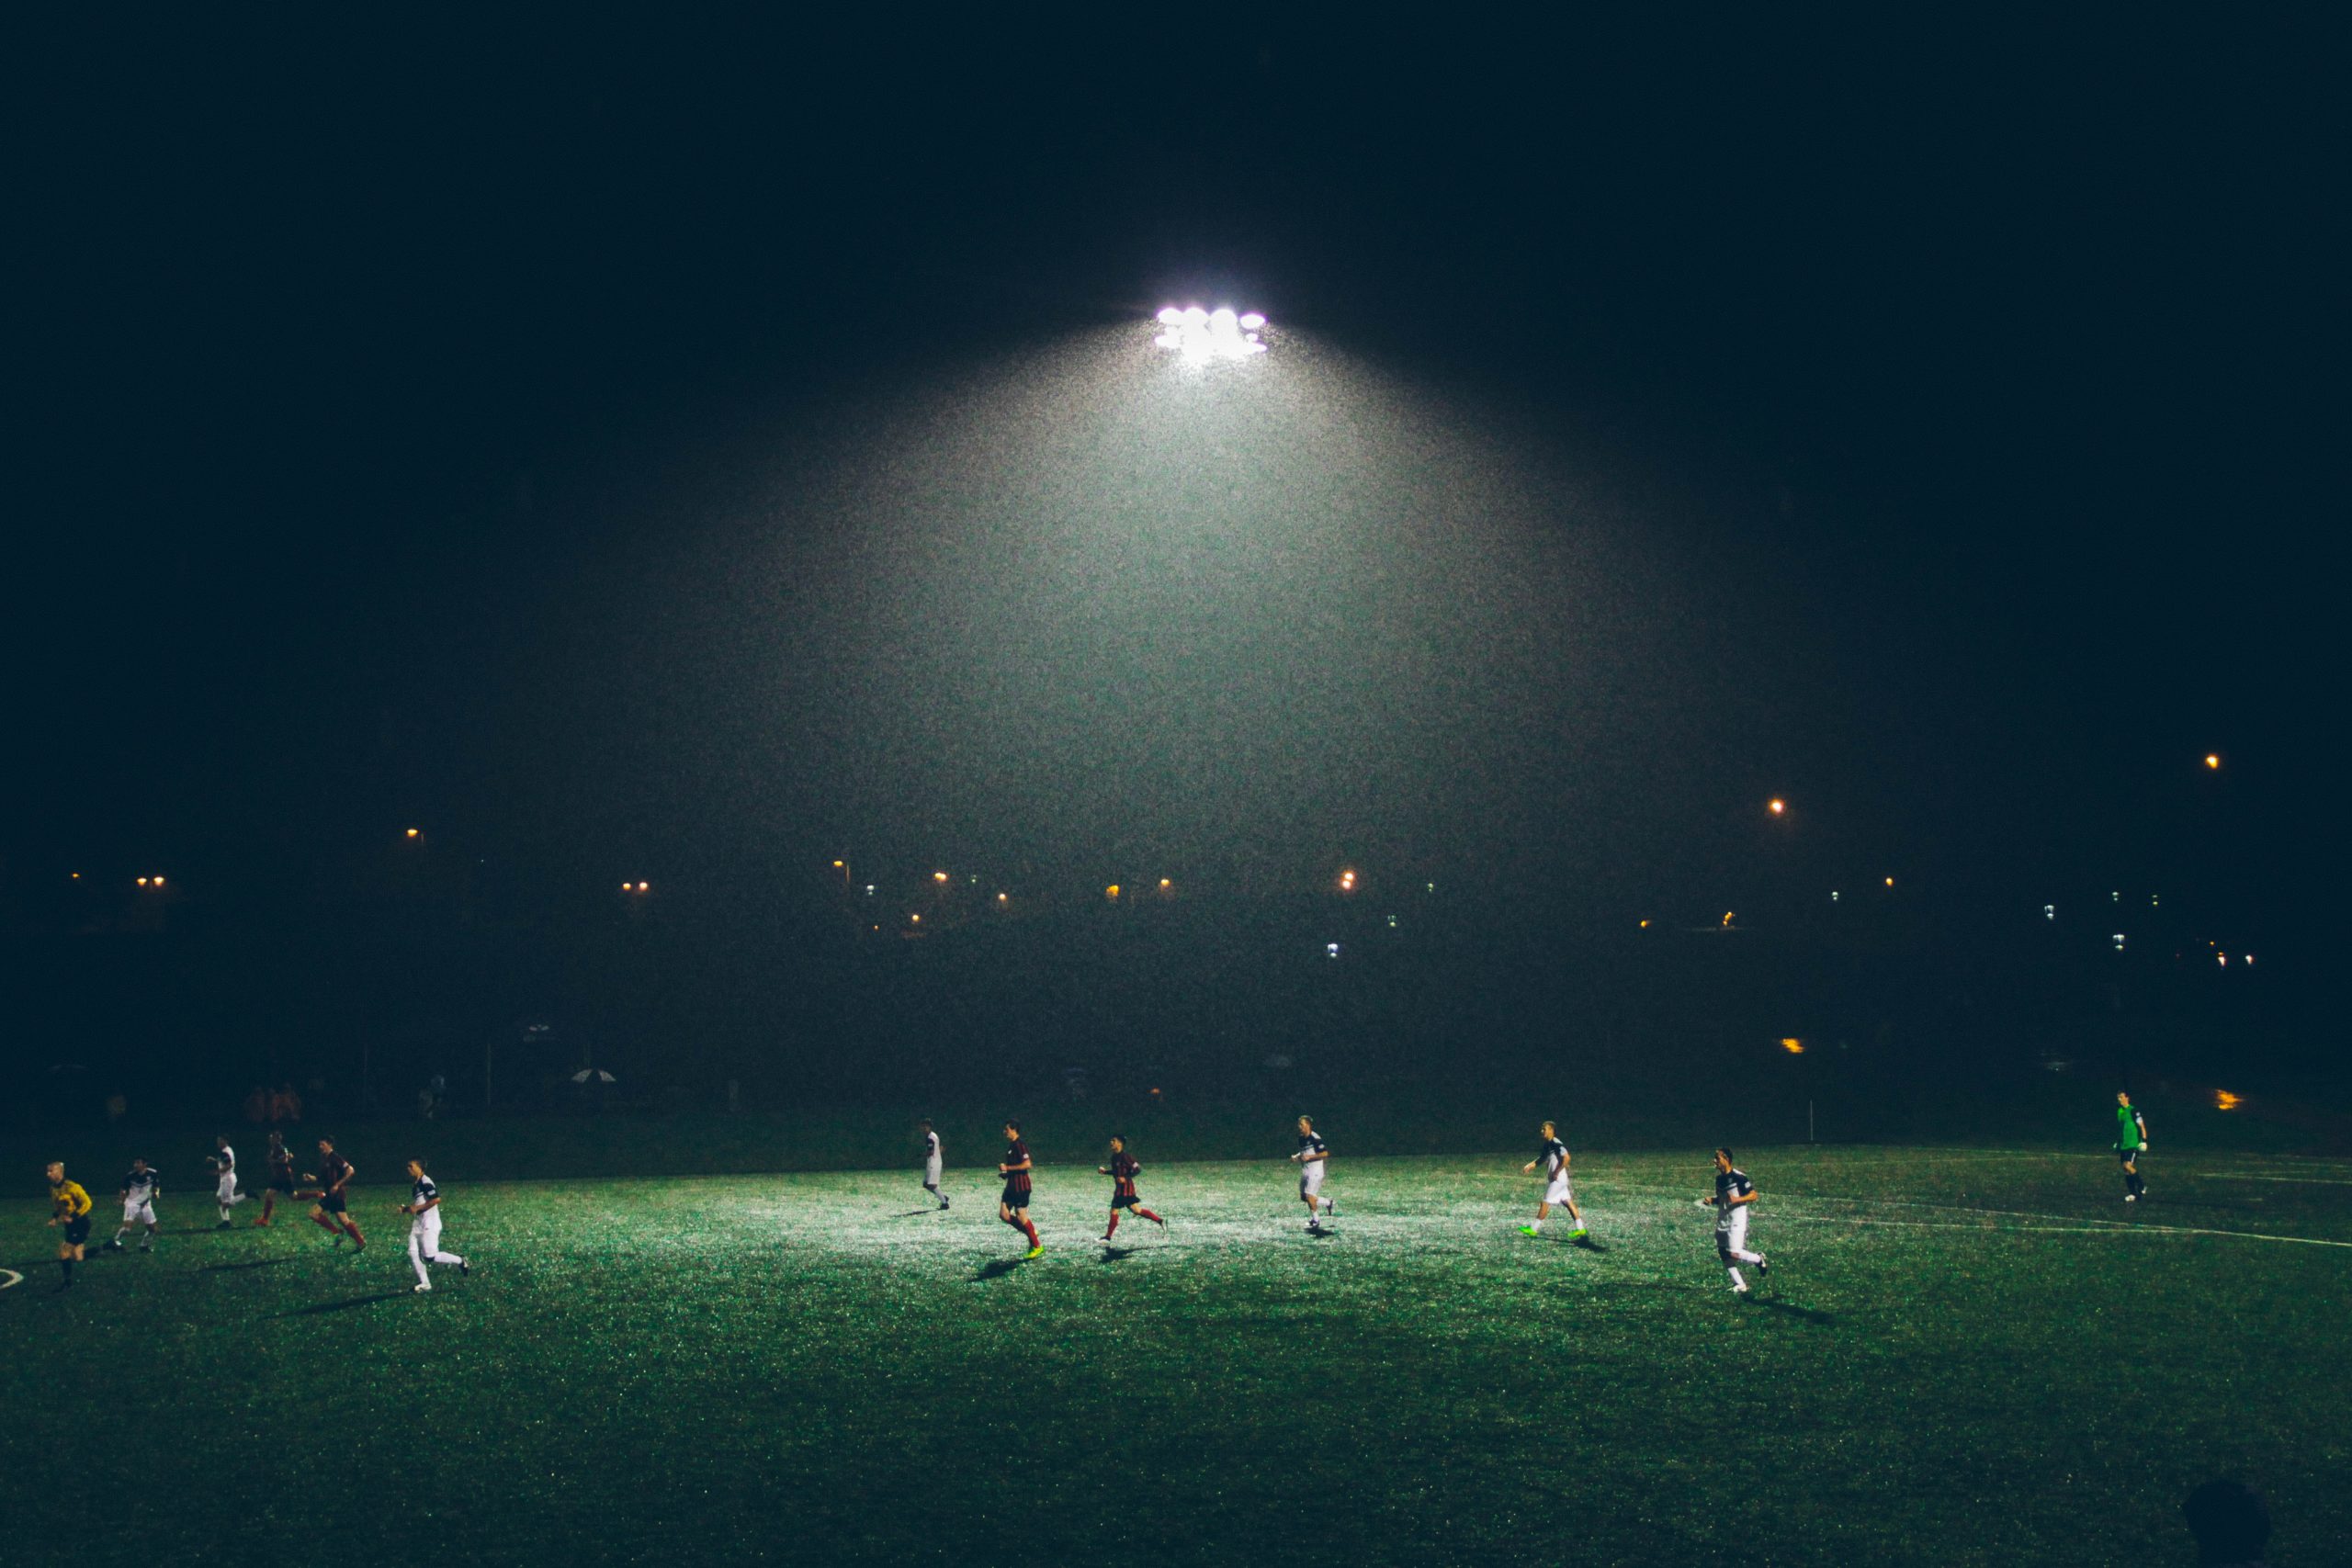 Flood lit football pitch at night with players playing on turf.